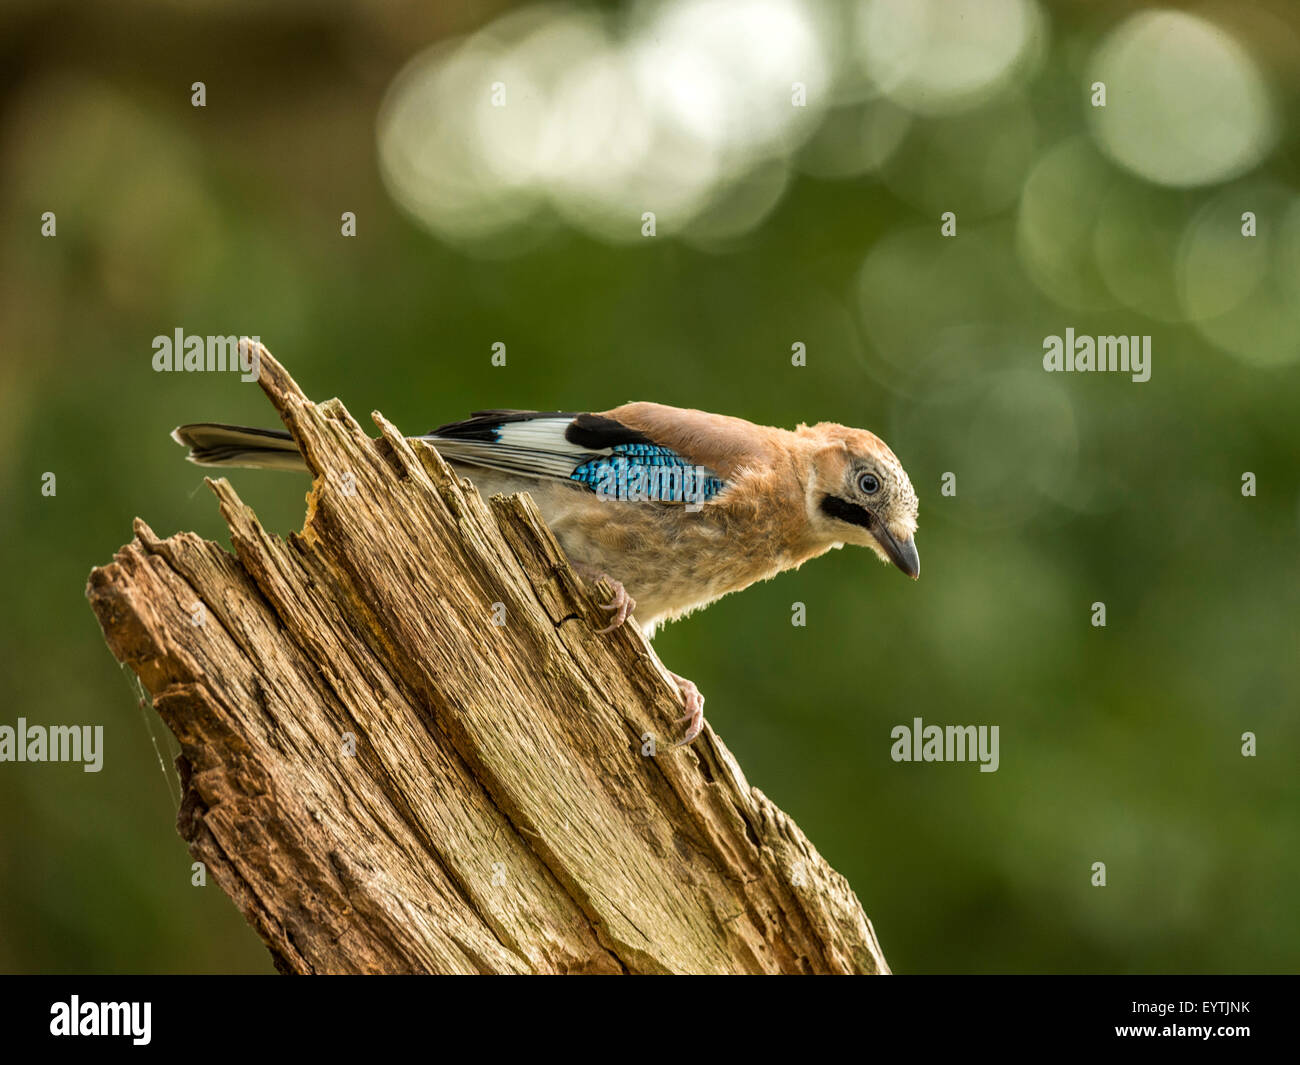 Eurasian Jay depicted perched on an old dilapidated wooden tree stump. 'Isolated against an illuminated green forest background' Stock Photo